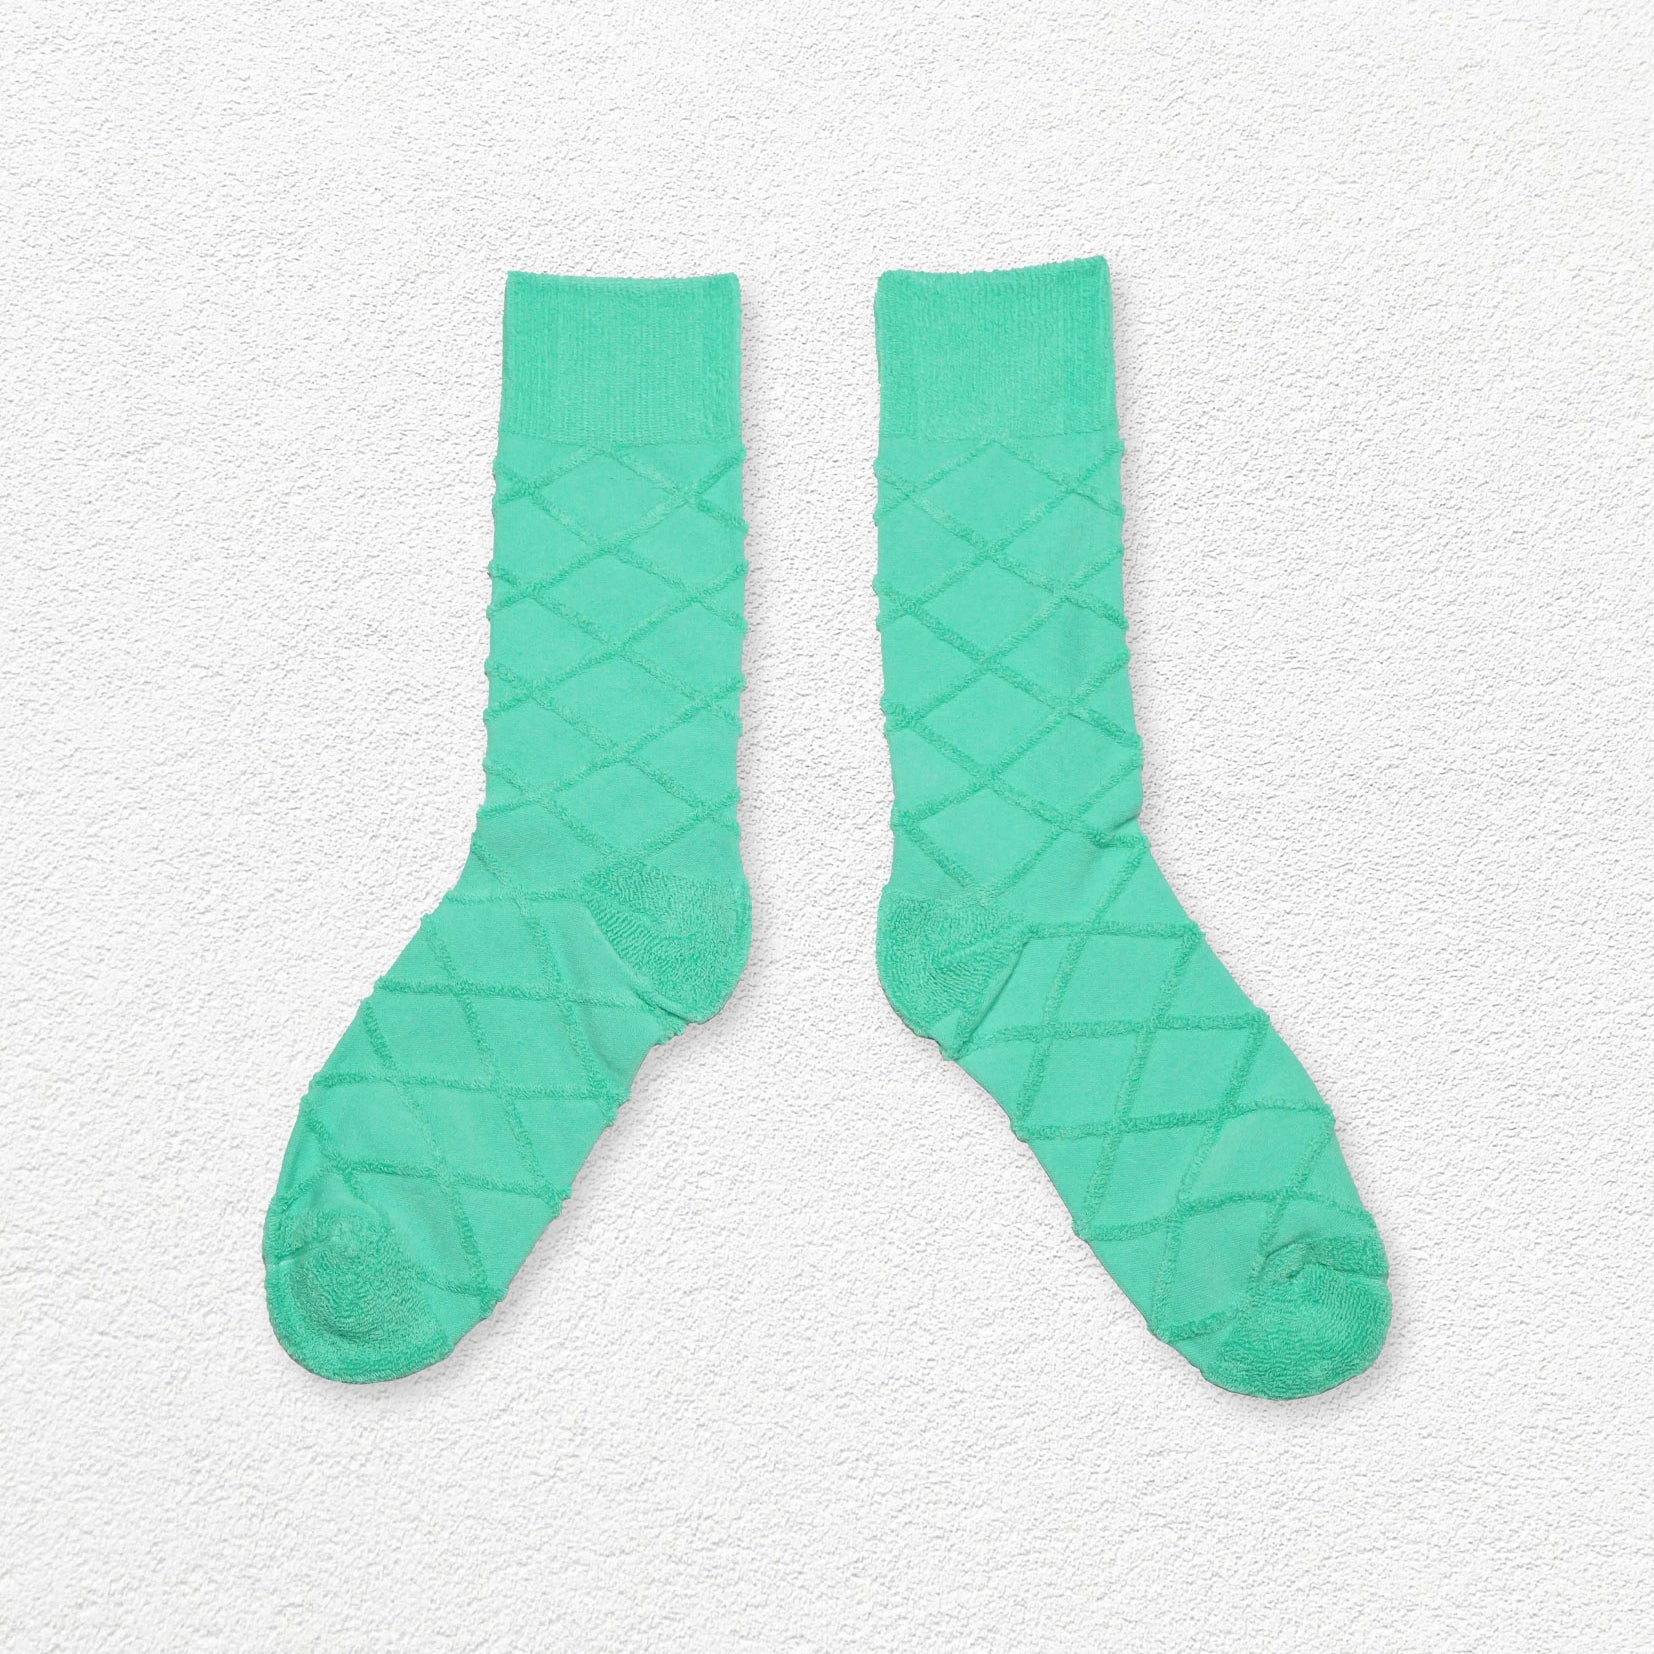 Terry jacquard mid-calf sock - turquoise